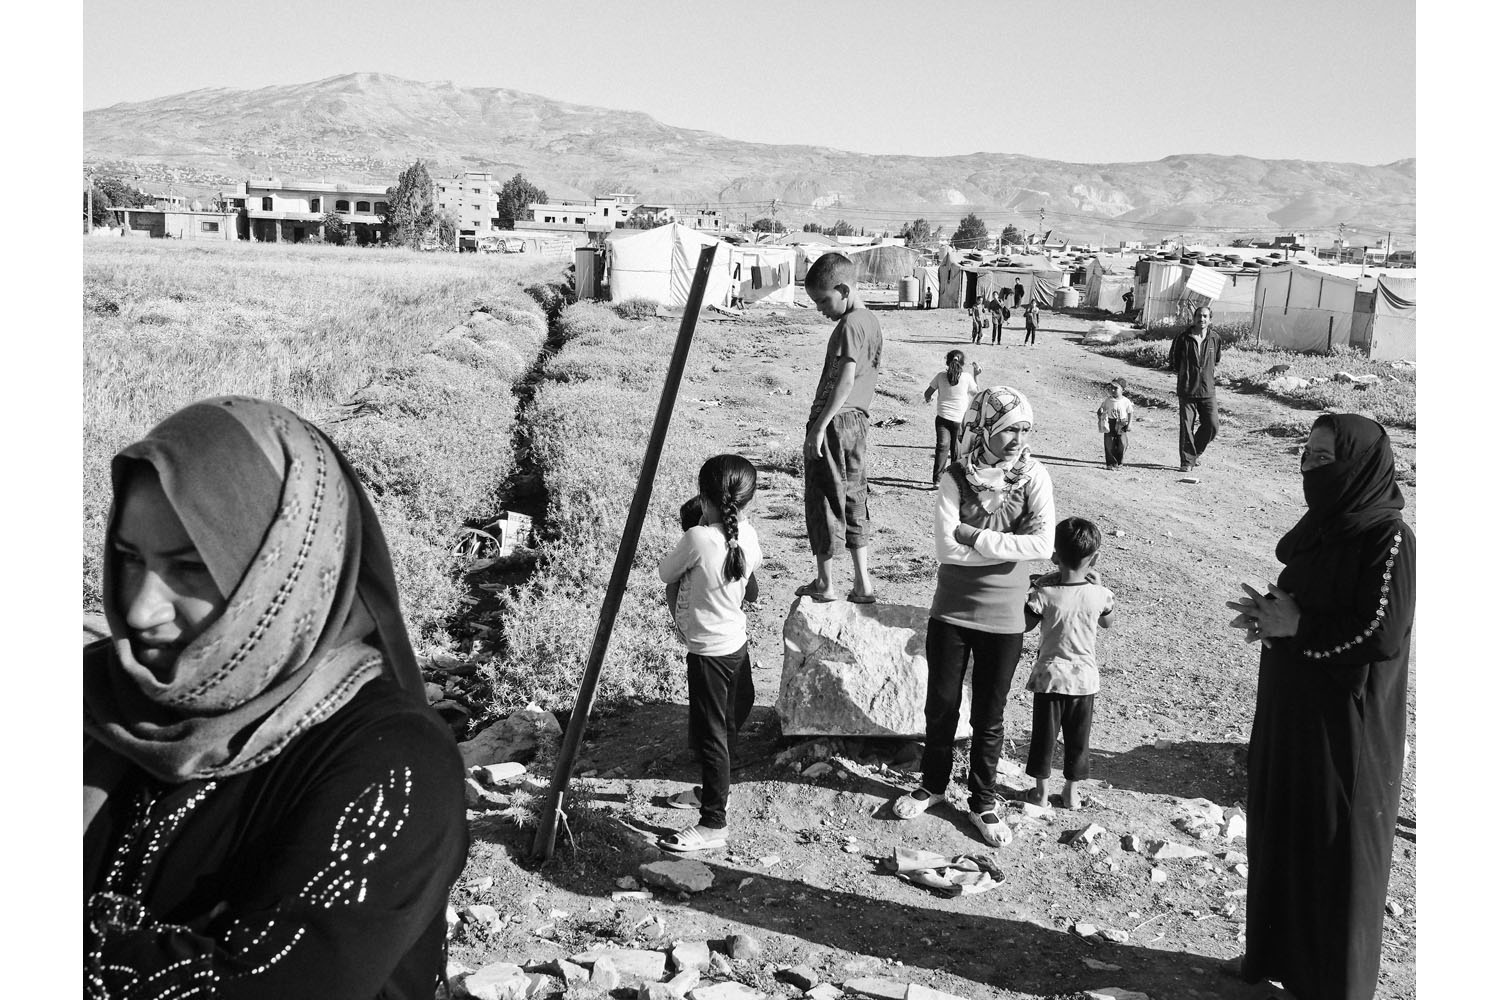 Bekaa Valley, Lebanon. June 2013. Syrian refugees outside a tent settlement near the town of Bar-elias, in Lebanon's Bekaa Valley.(Photo by Moises Saman/MAGNUM)